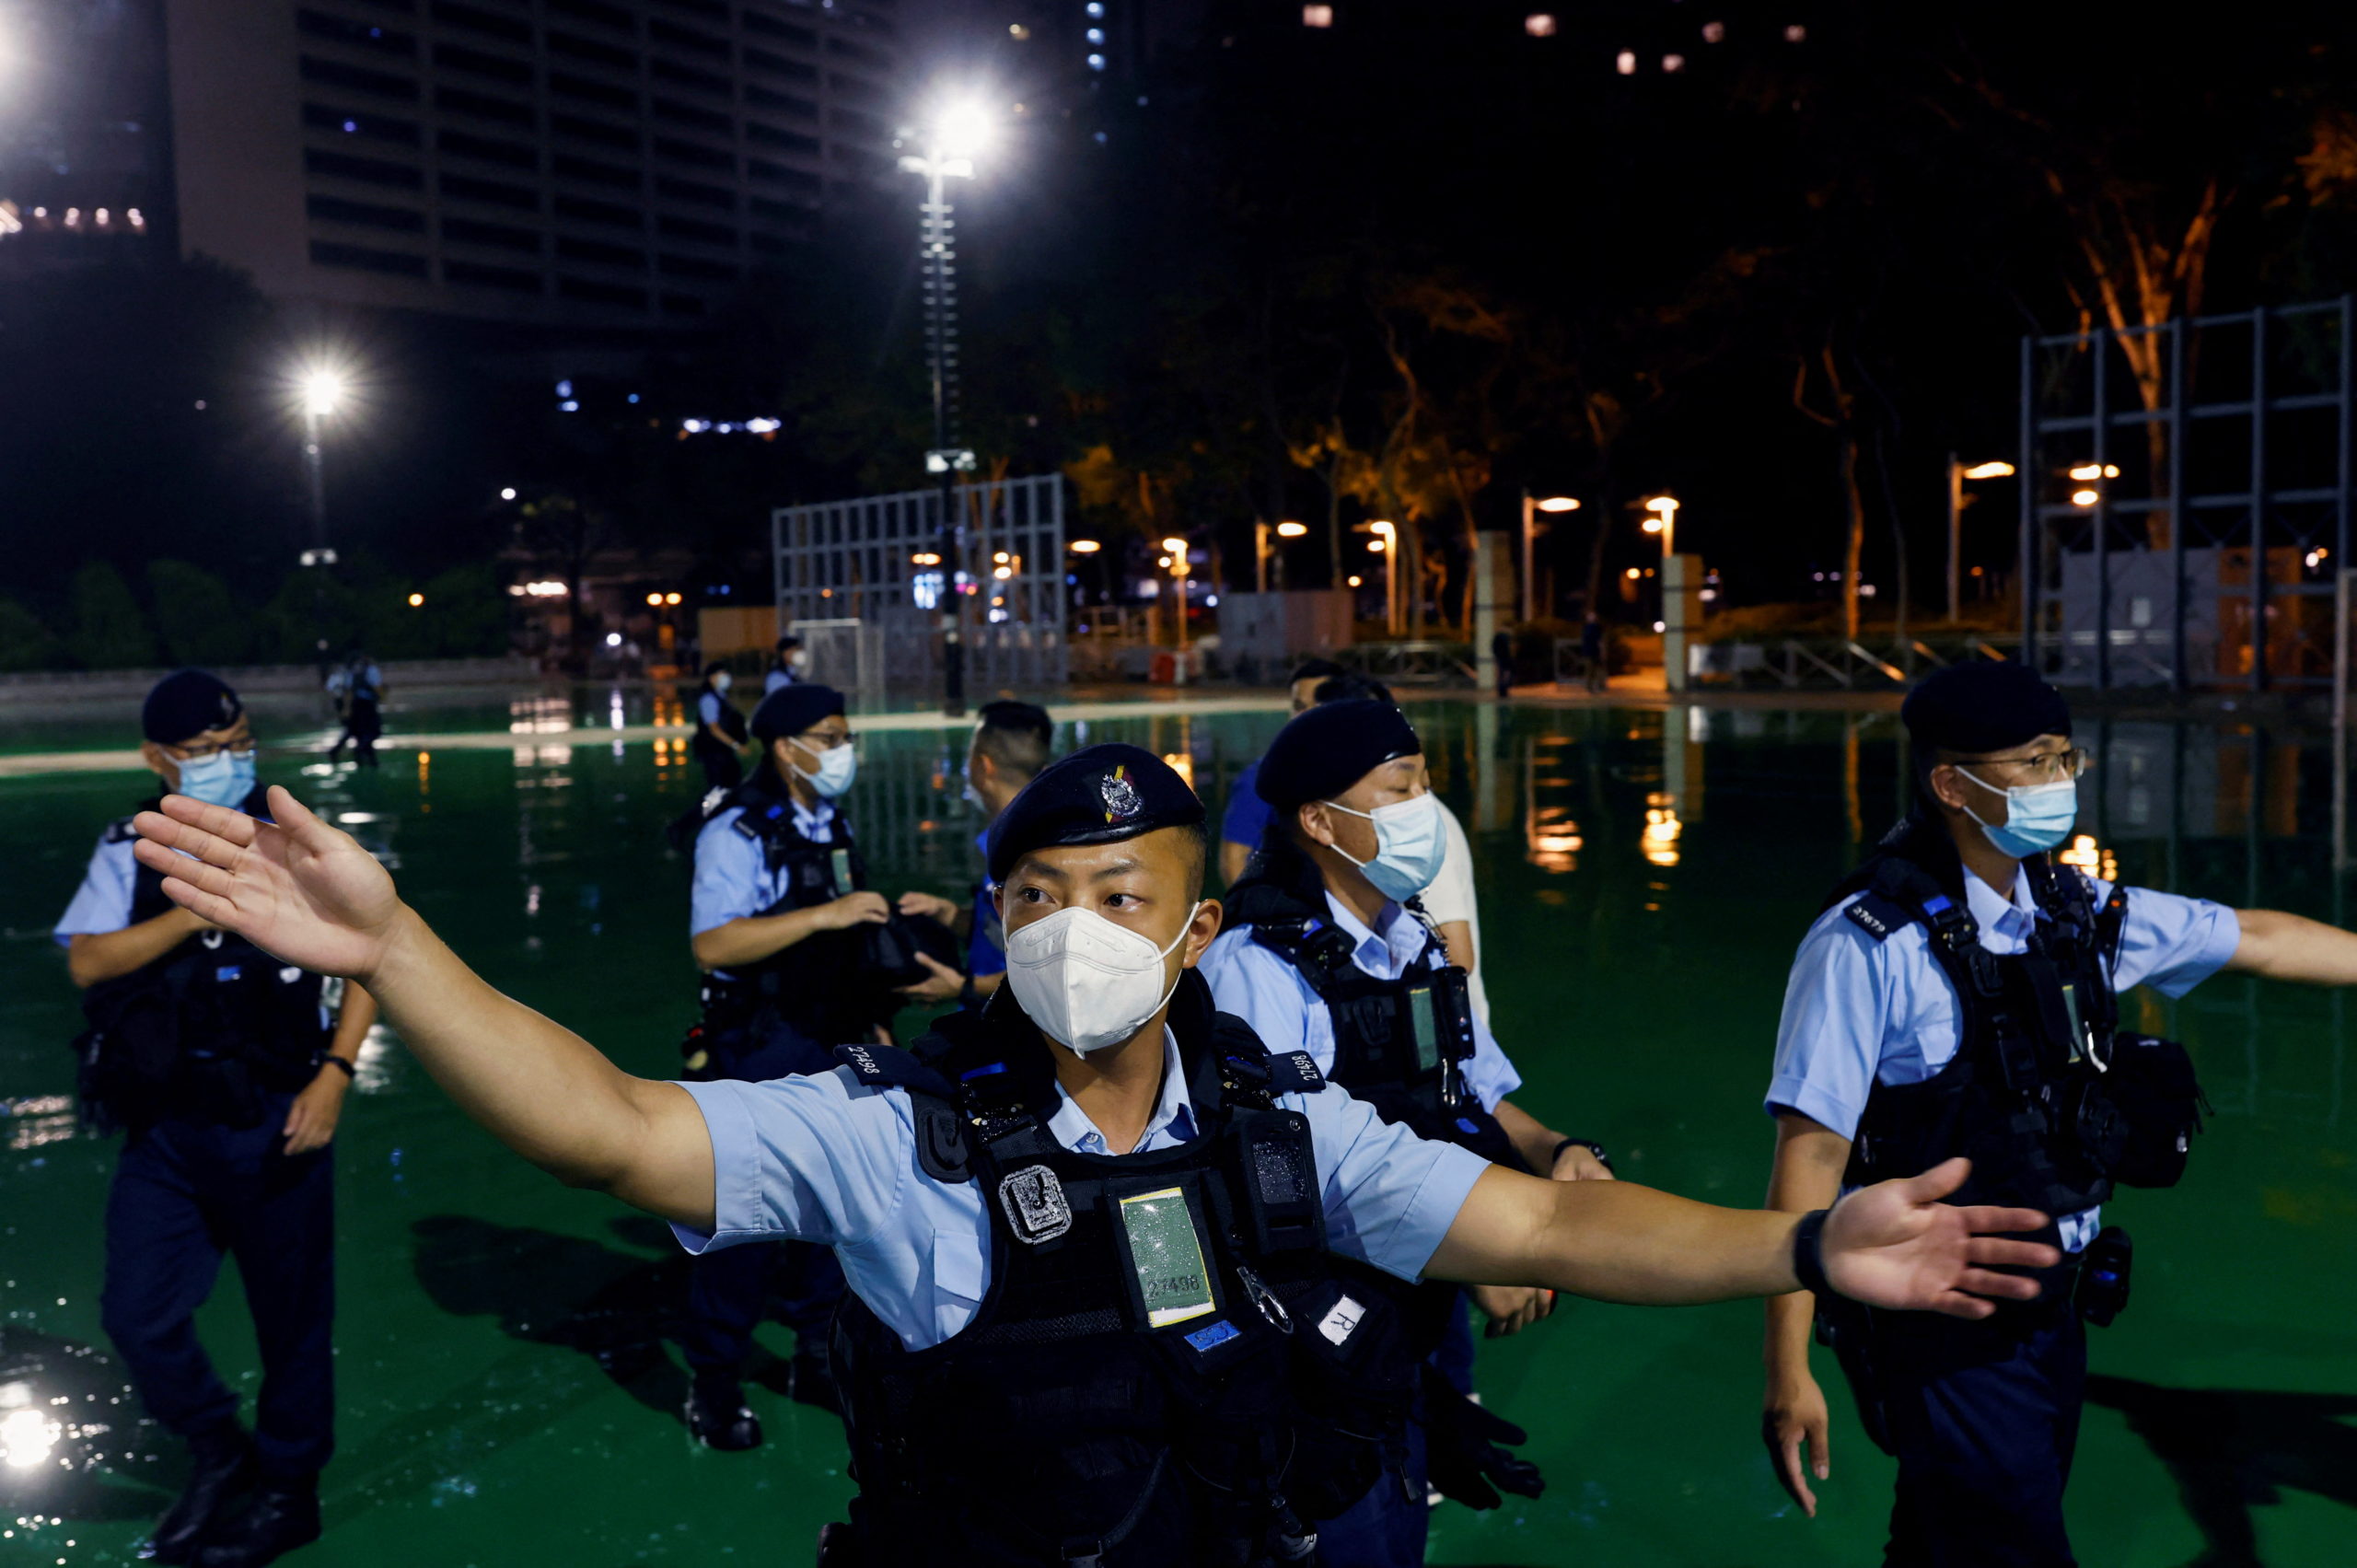 Police officers ask people to leave after announcing the closure of part of Victoria Park, where the candlelight vigil used to be held, a day a head of the 33rd anniversary of the crackdown on pro-democracy demonstrations at Beijing's Tiananmen Square, in Hong Kong, China, June 3, 2022. REUTERS/Tyrone Siu